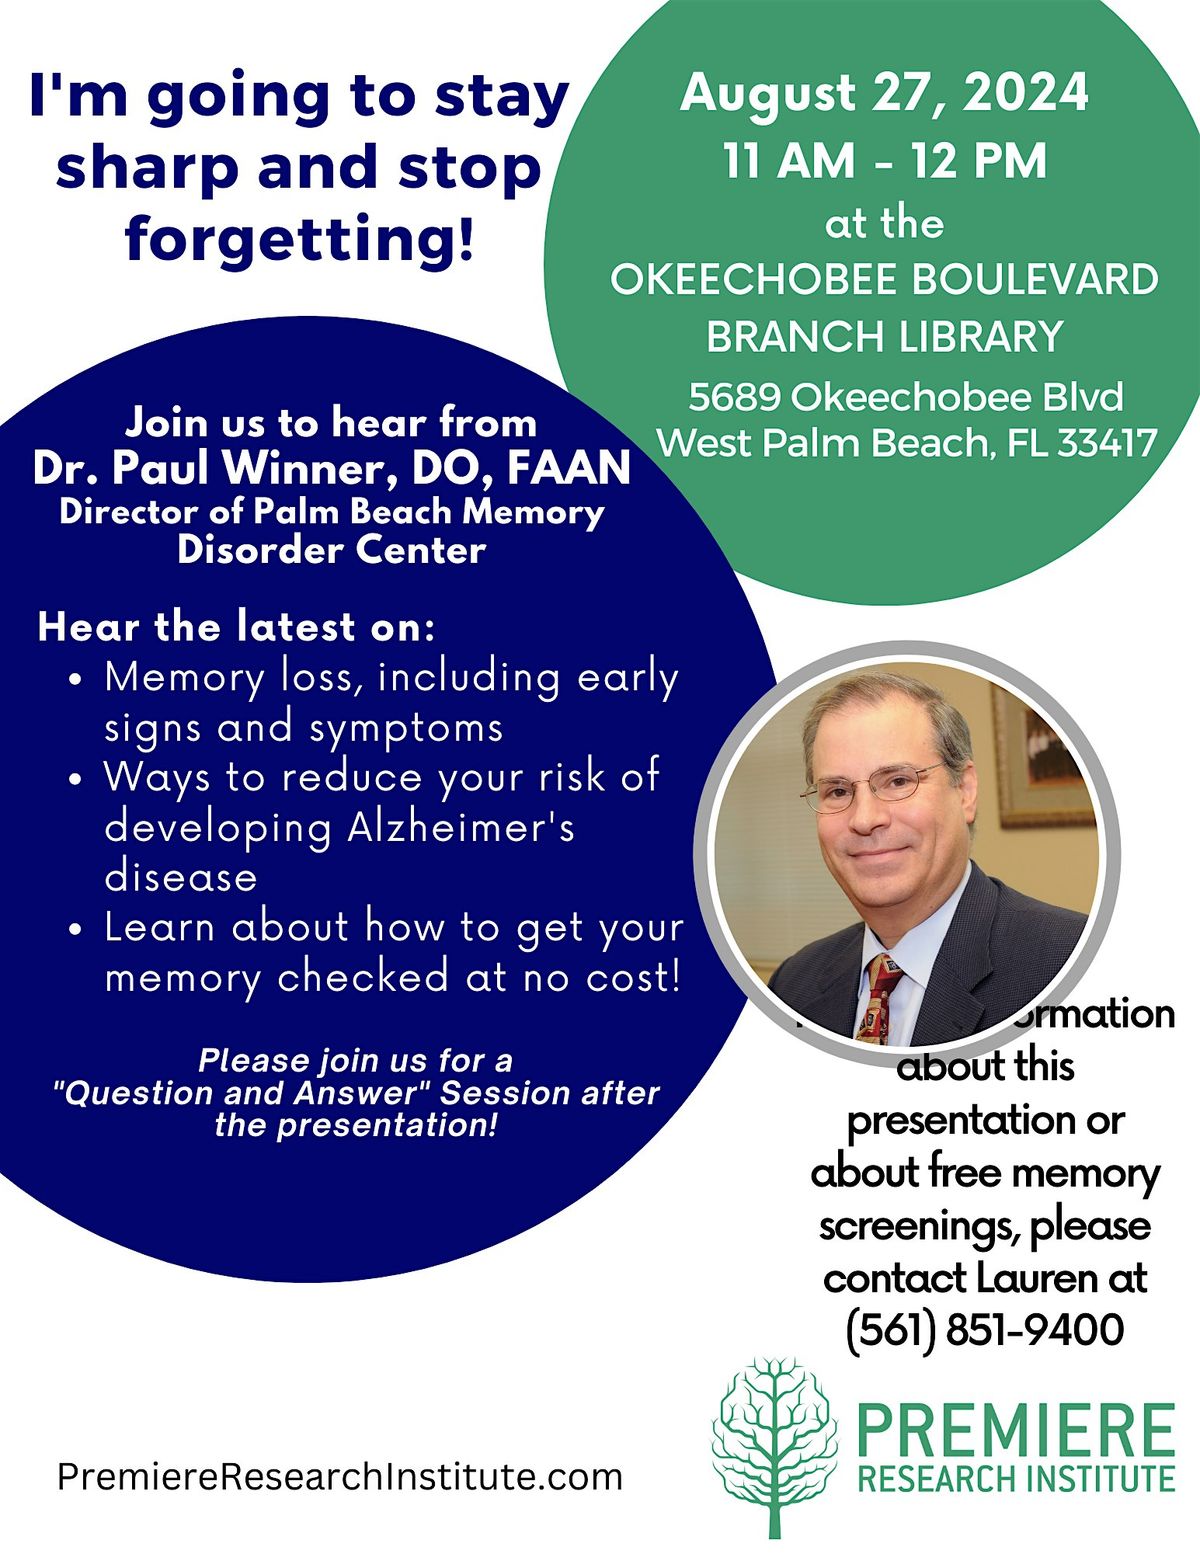 New Hope: Learn About Memory Loss - Okeechobee Boulevard Branch Library